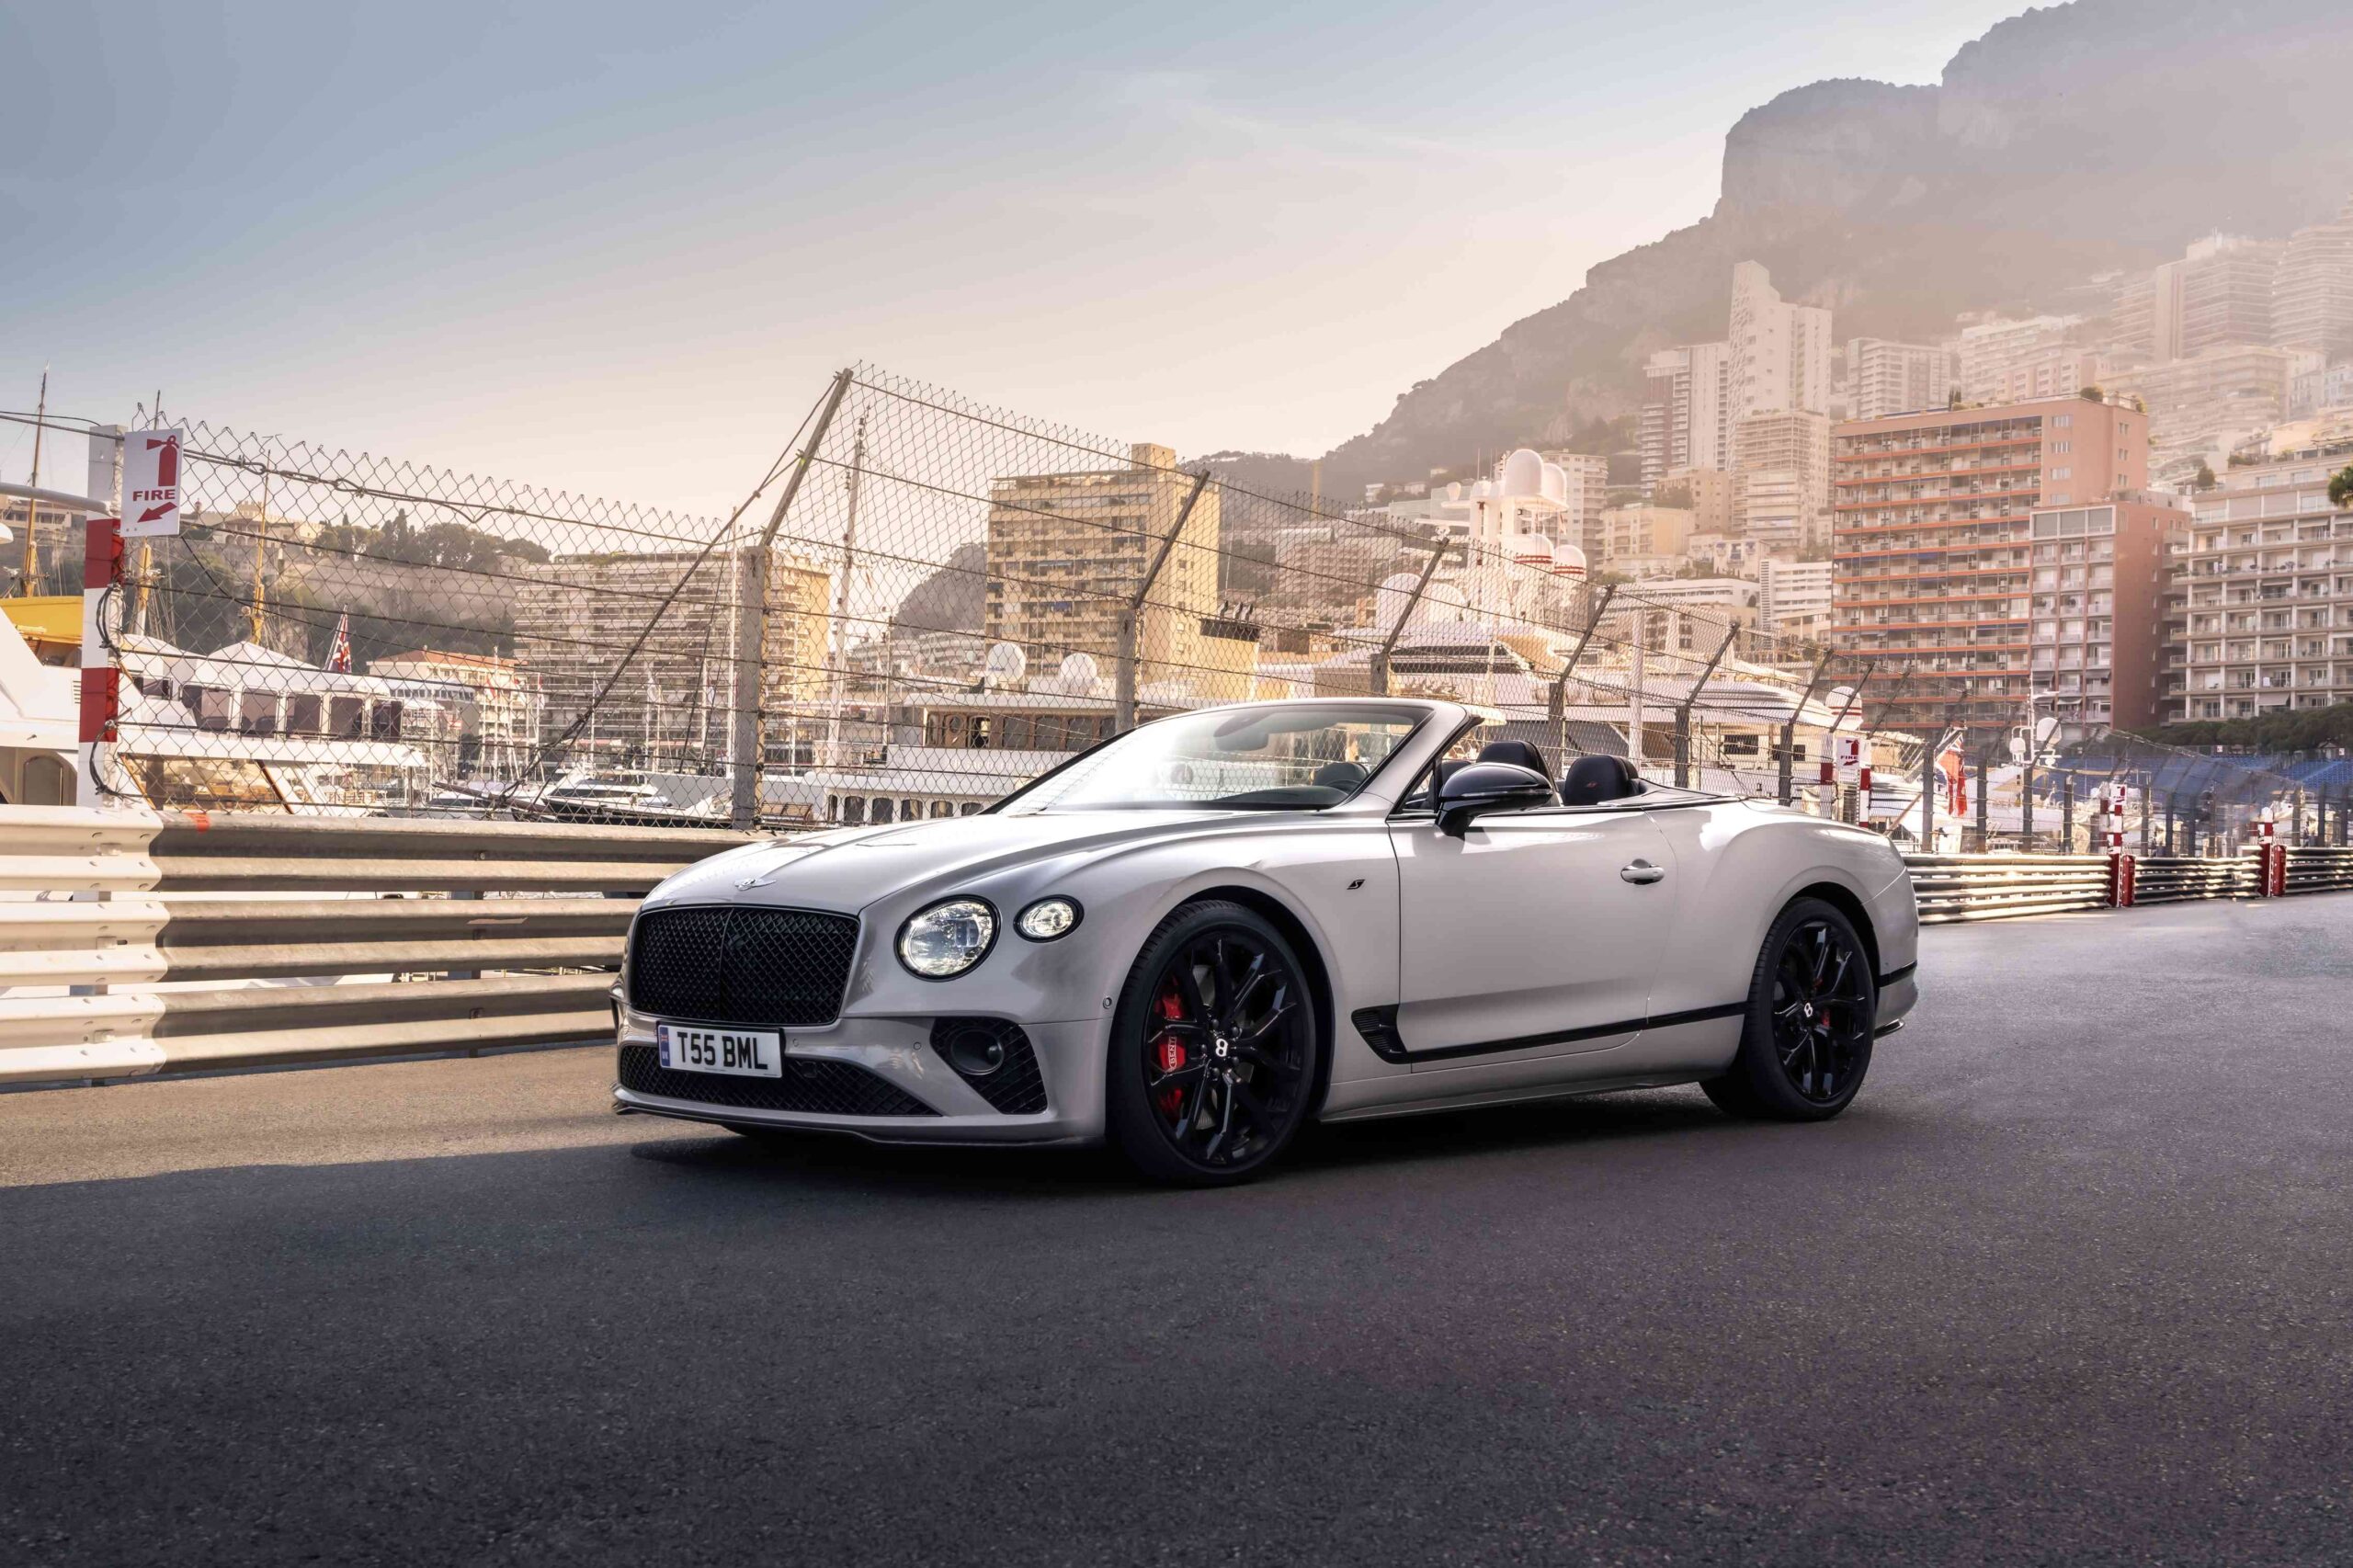 New Continental GT and GTC S - A Sharper Edge